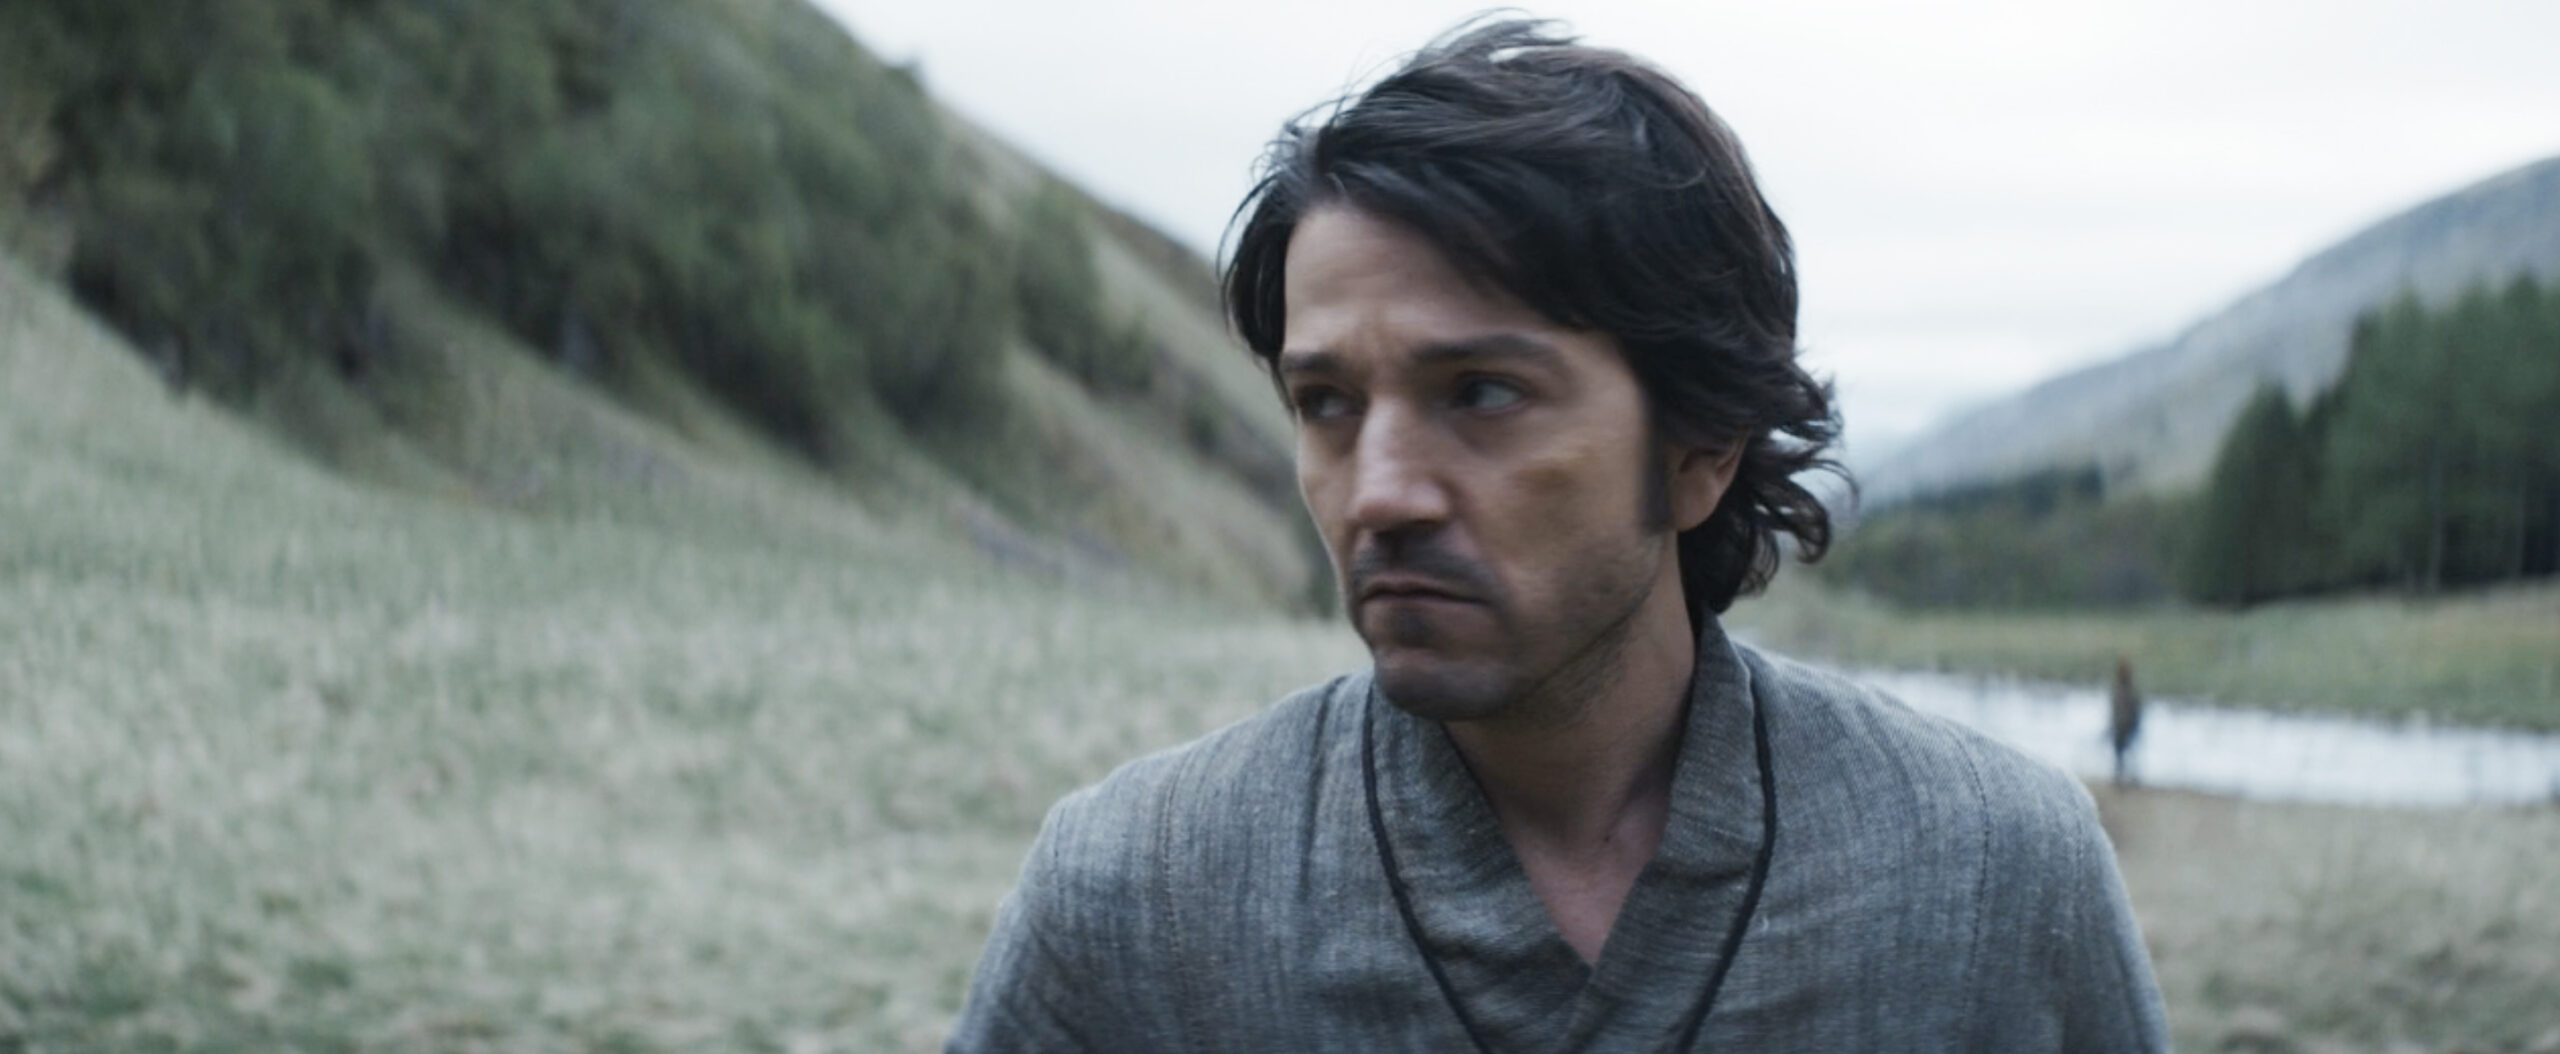 cassian looking annoyed in andor